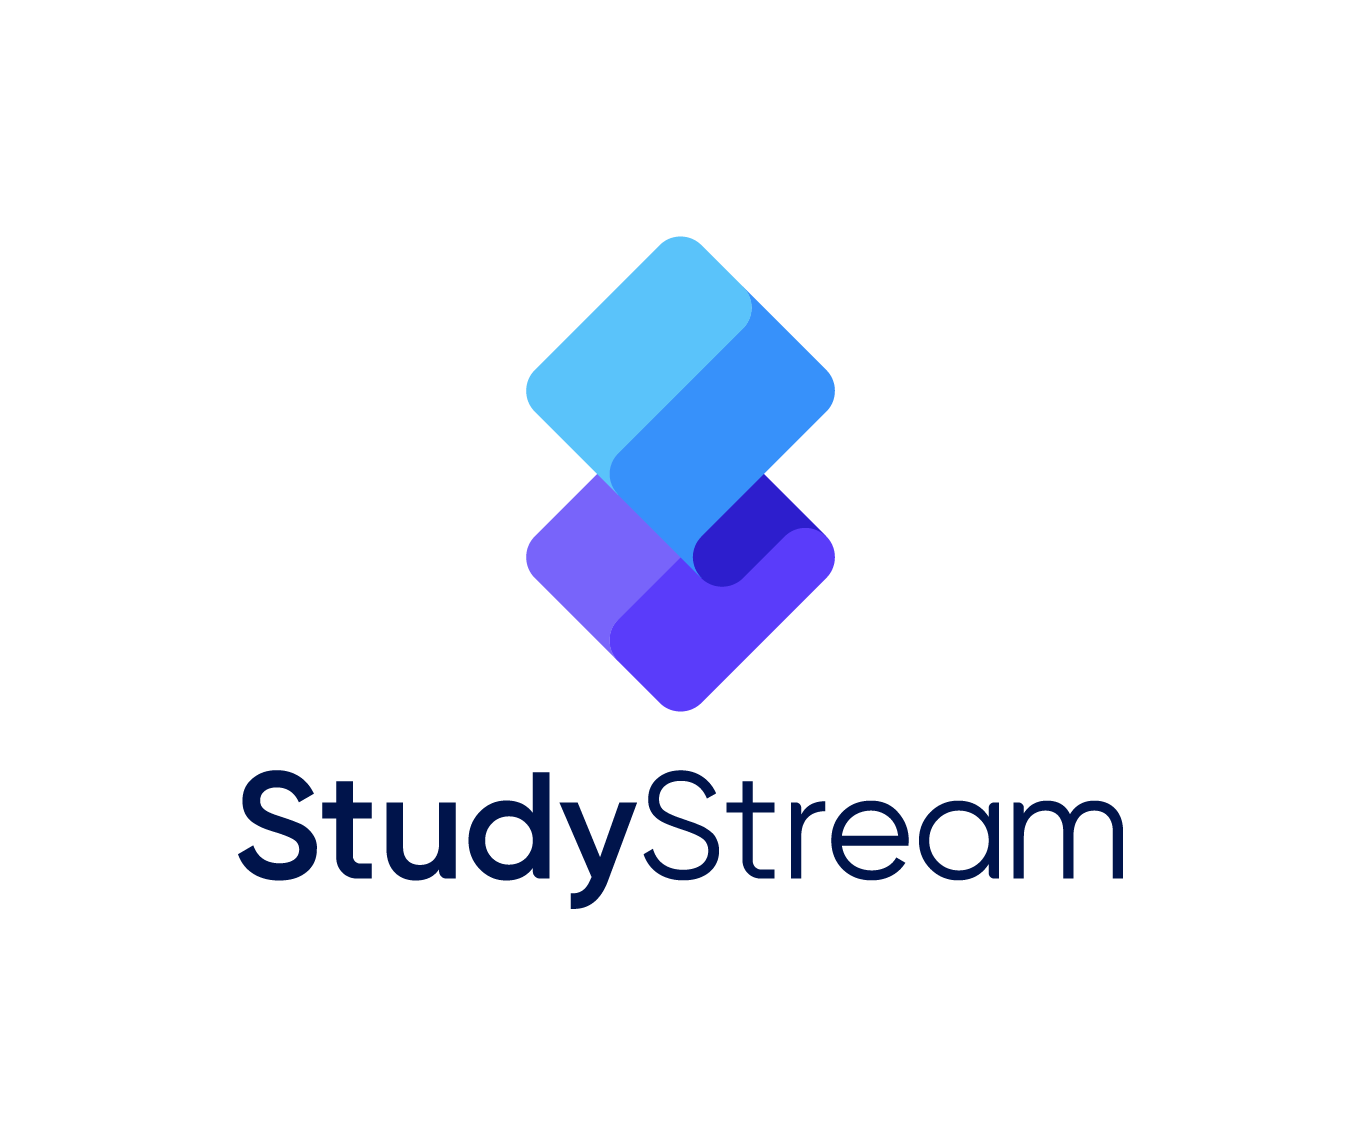 How-To Guide: Staying Safe on StudyStream